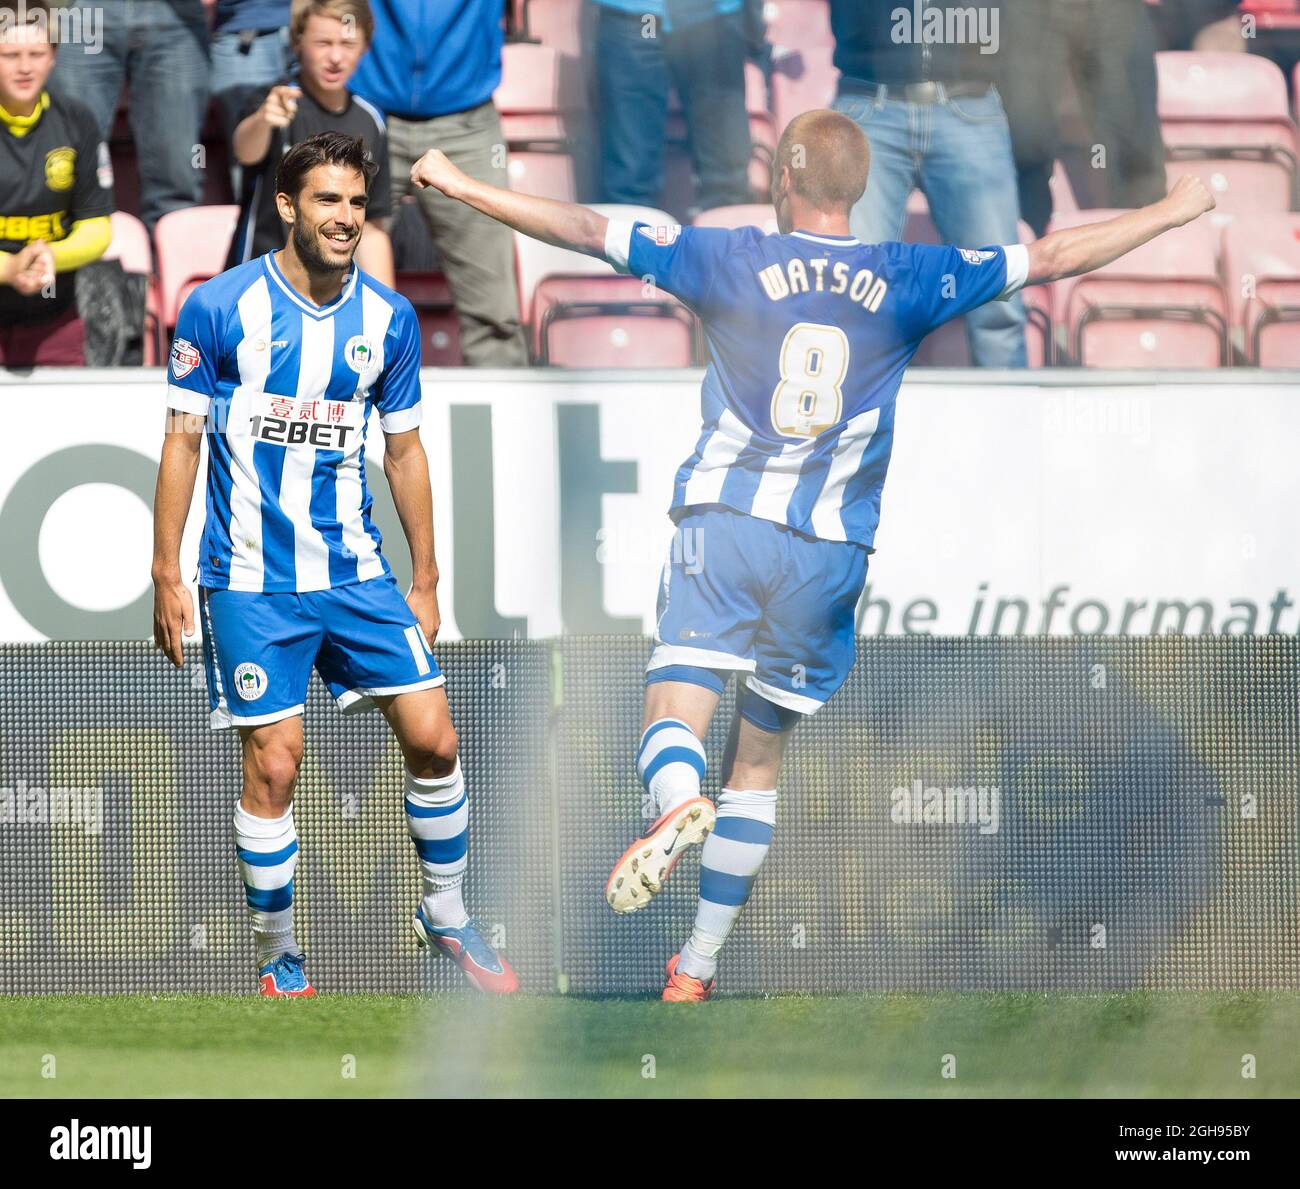 Wigan's Jordi Gomez celebrates his winning goal during the Sky Bet Football League Championship match between Wigan Athletic and Nottingham Forest at the DW Stadium, Wigan on August 31, 2013. Stock Photo